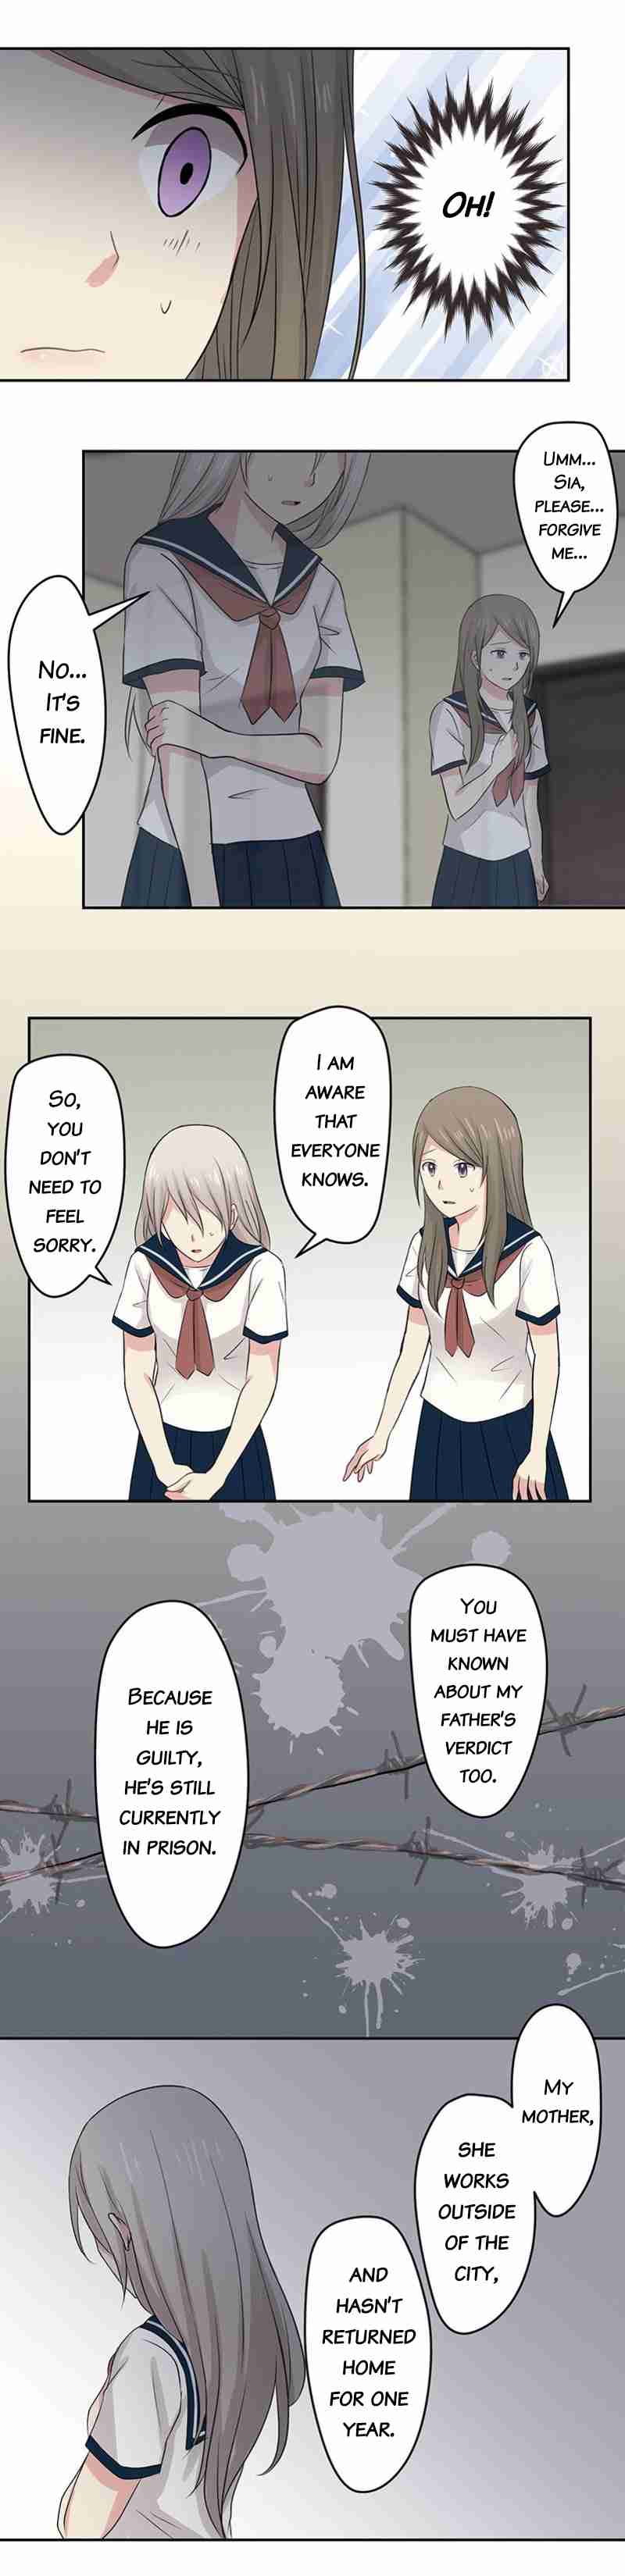 Switched Girls Ch. 8 About Mei Sia (First Half)